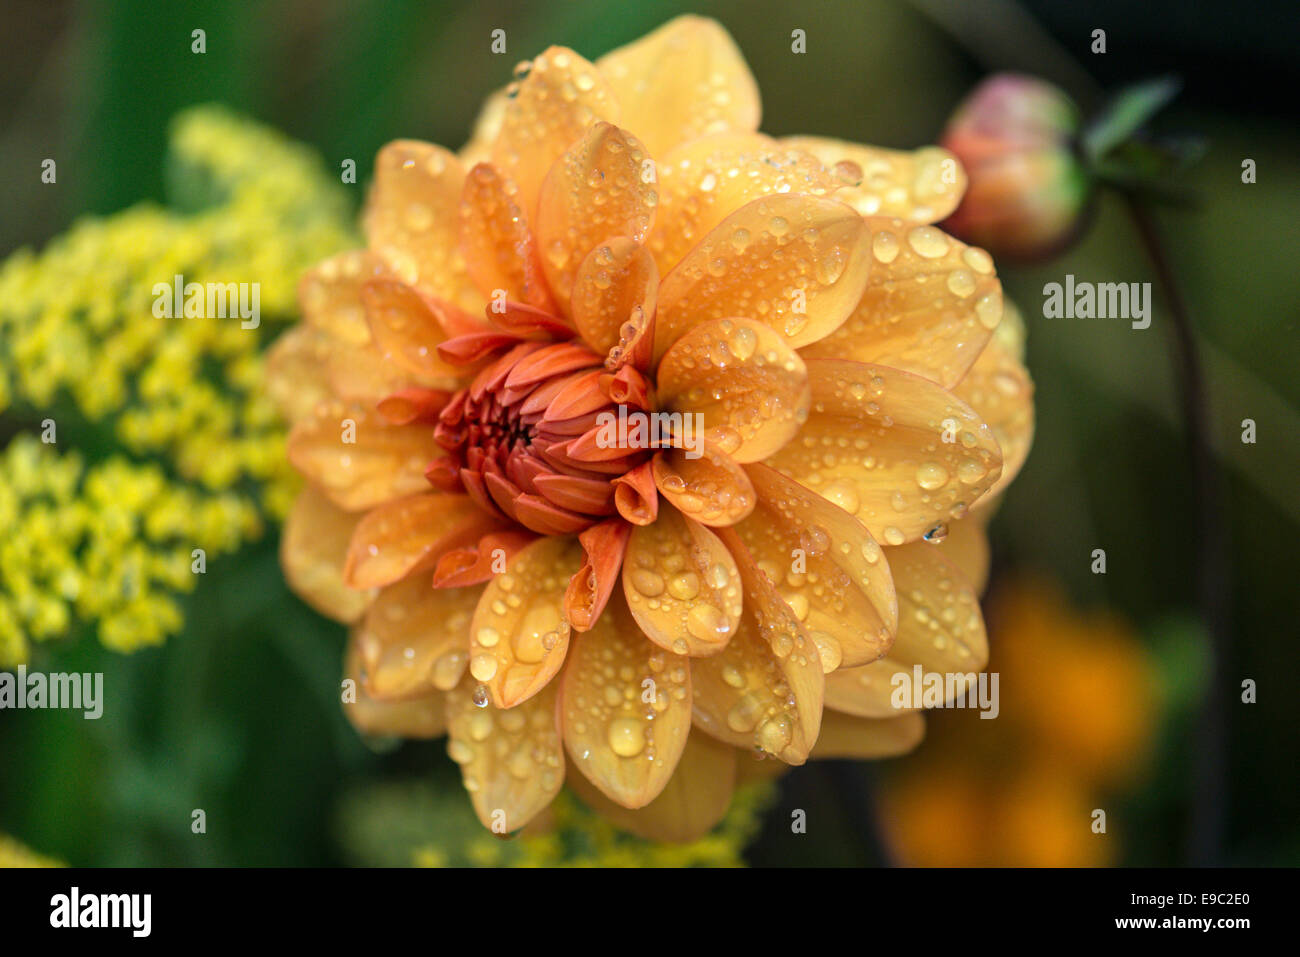 Stunning Dahlia with flame orange petals covered in water droplets catching the light. Single flower isolated background. Stock Photo